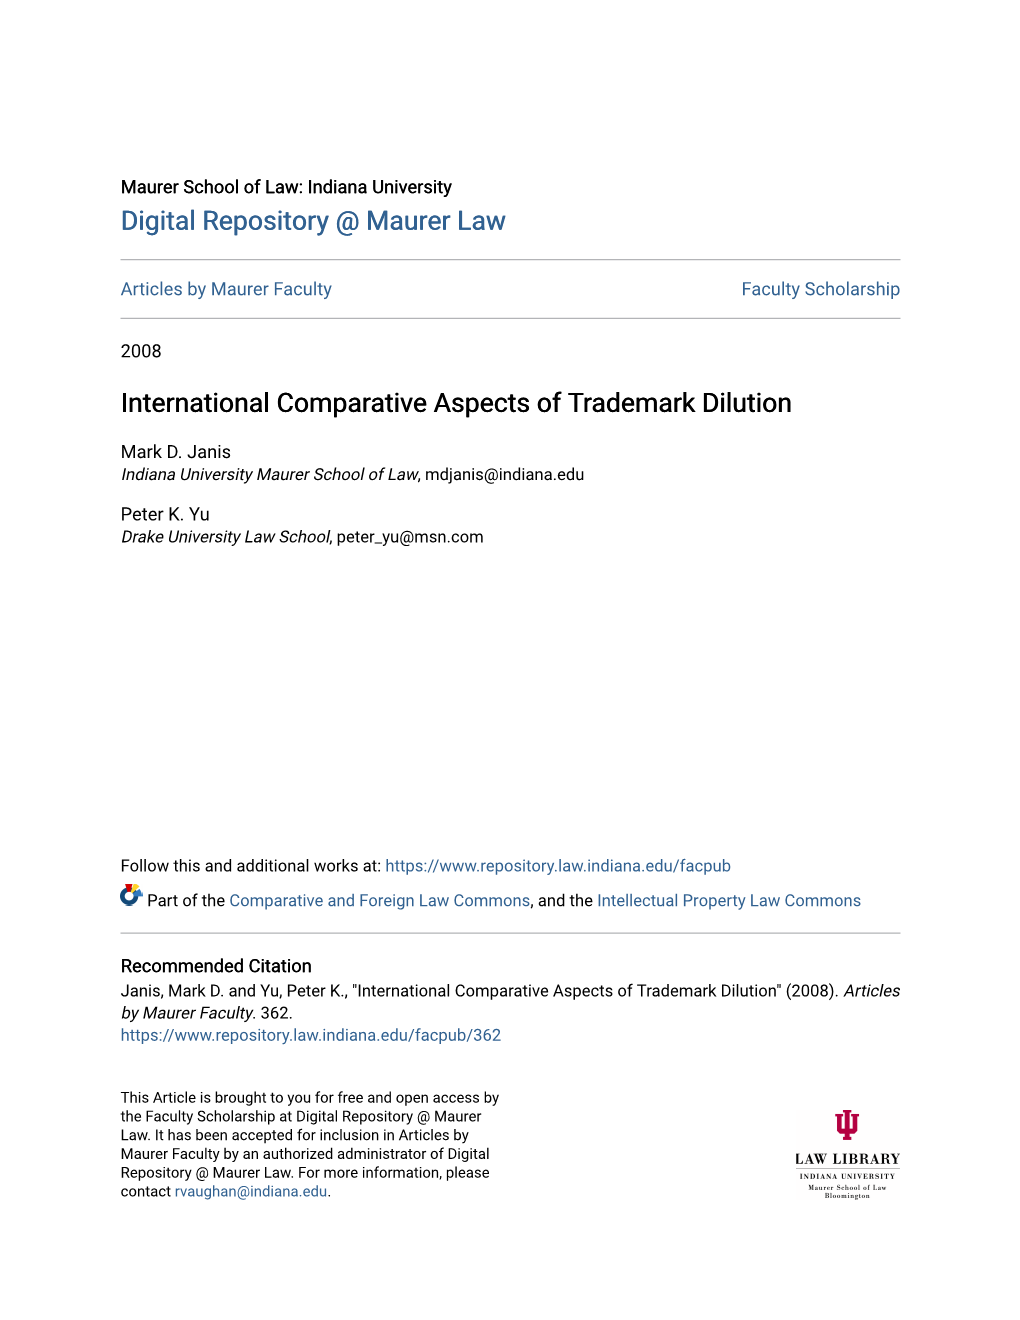 International Comparative Aspects of Trademark Dilution